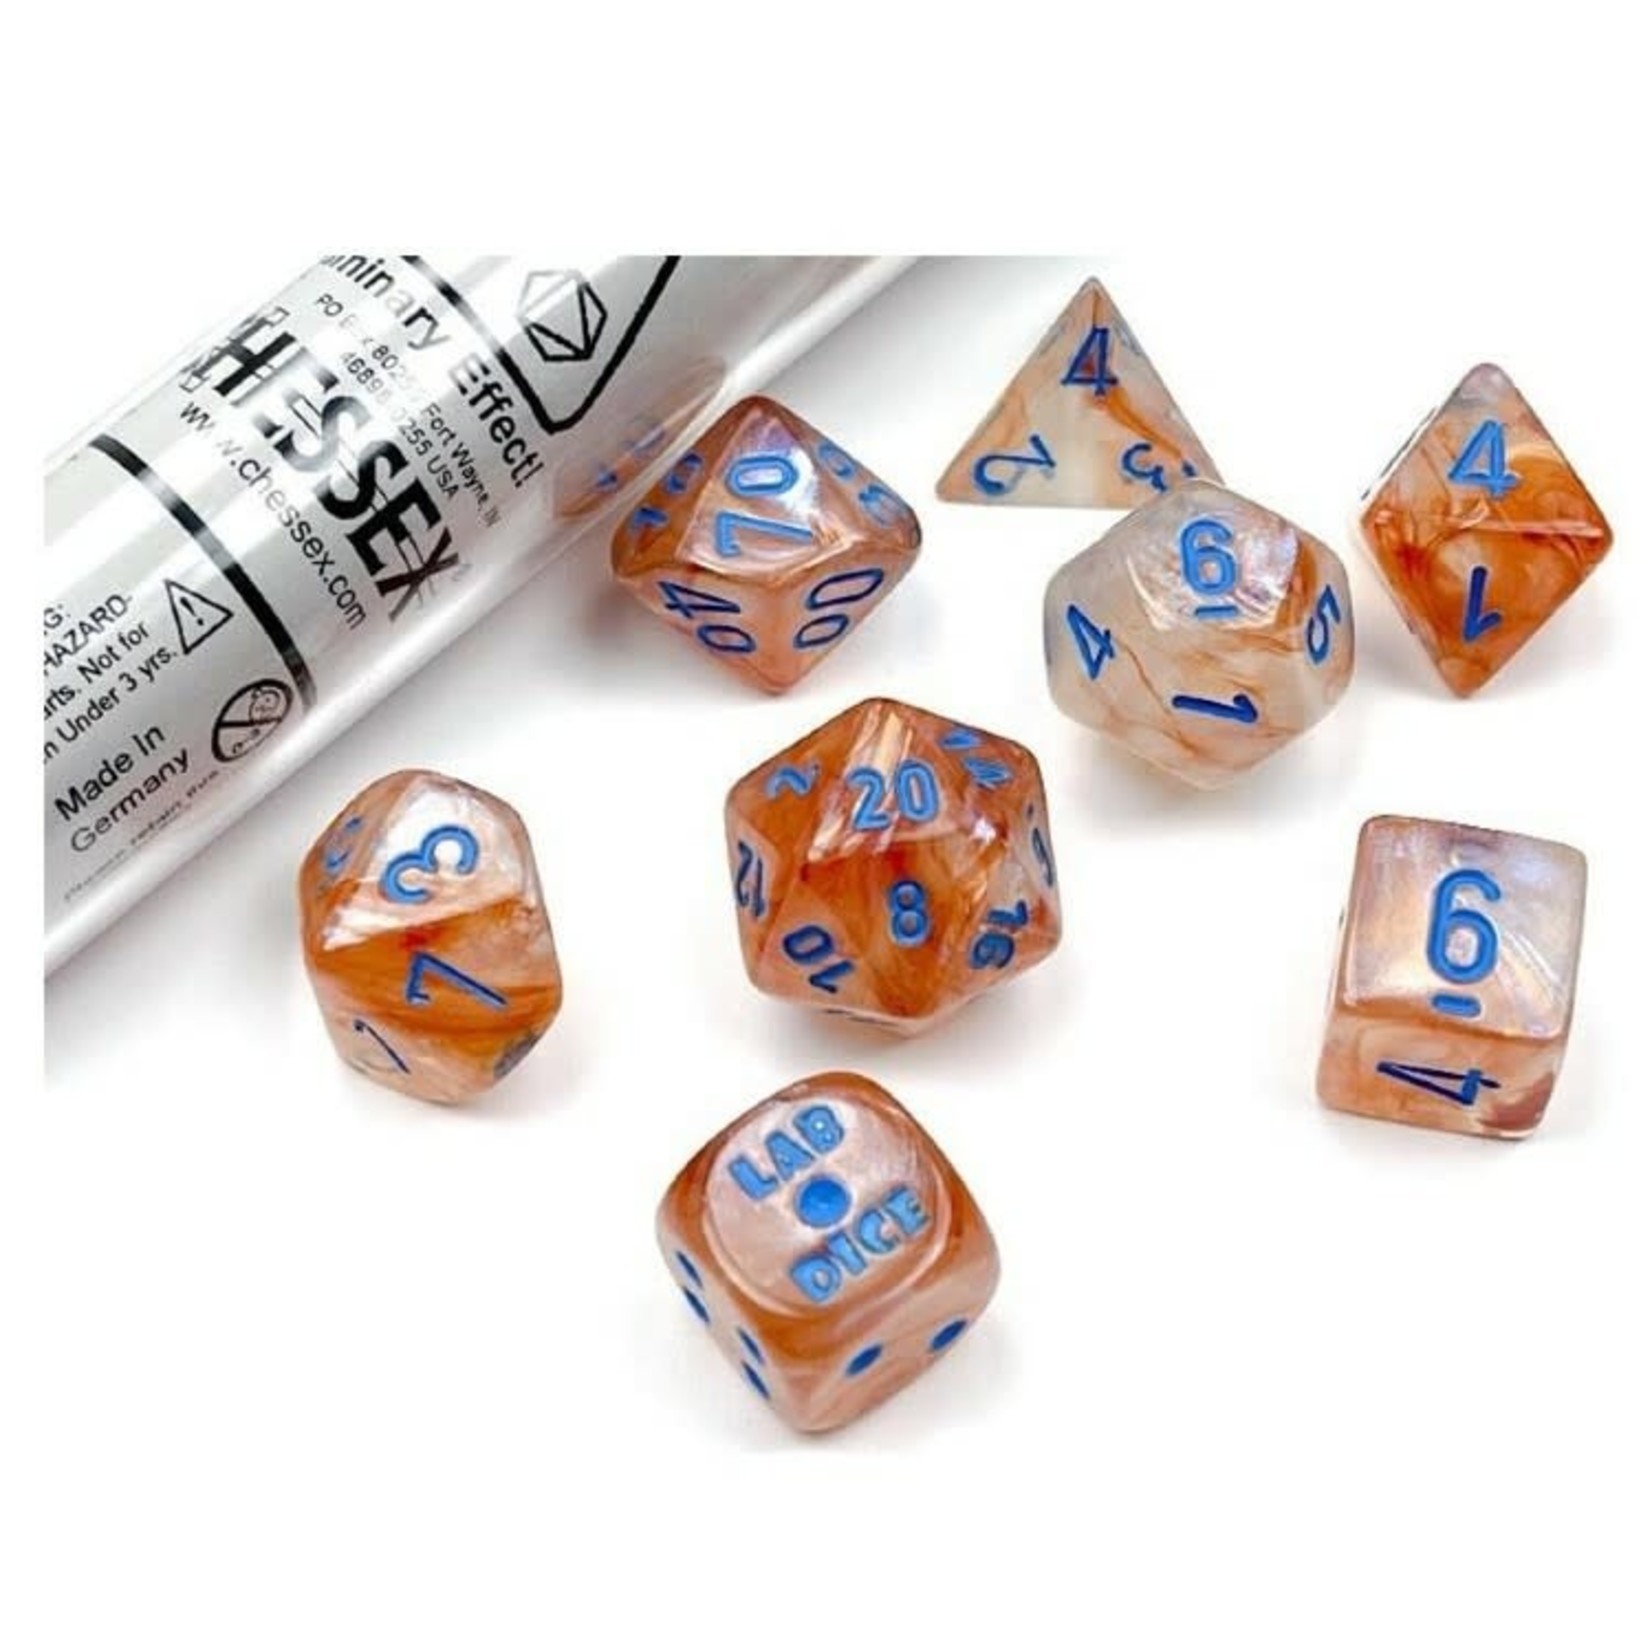 Chessex Chessex Lab Dice Borealis Rose Gold with Light Blue Luminary Polyhedral 7 die set